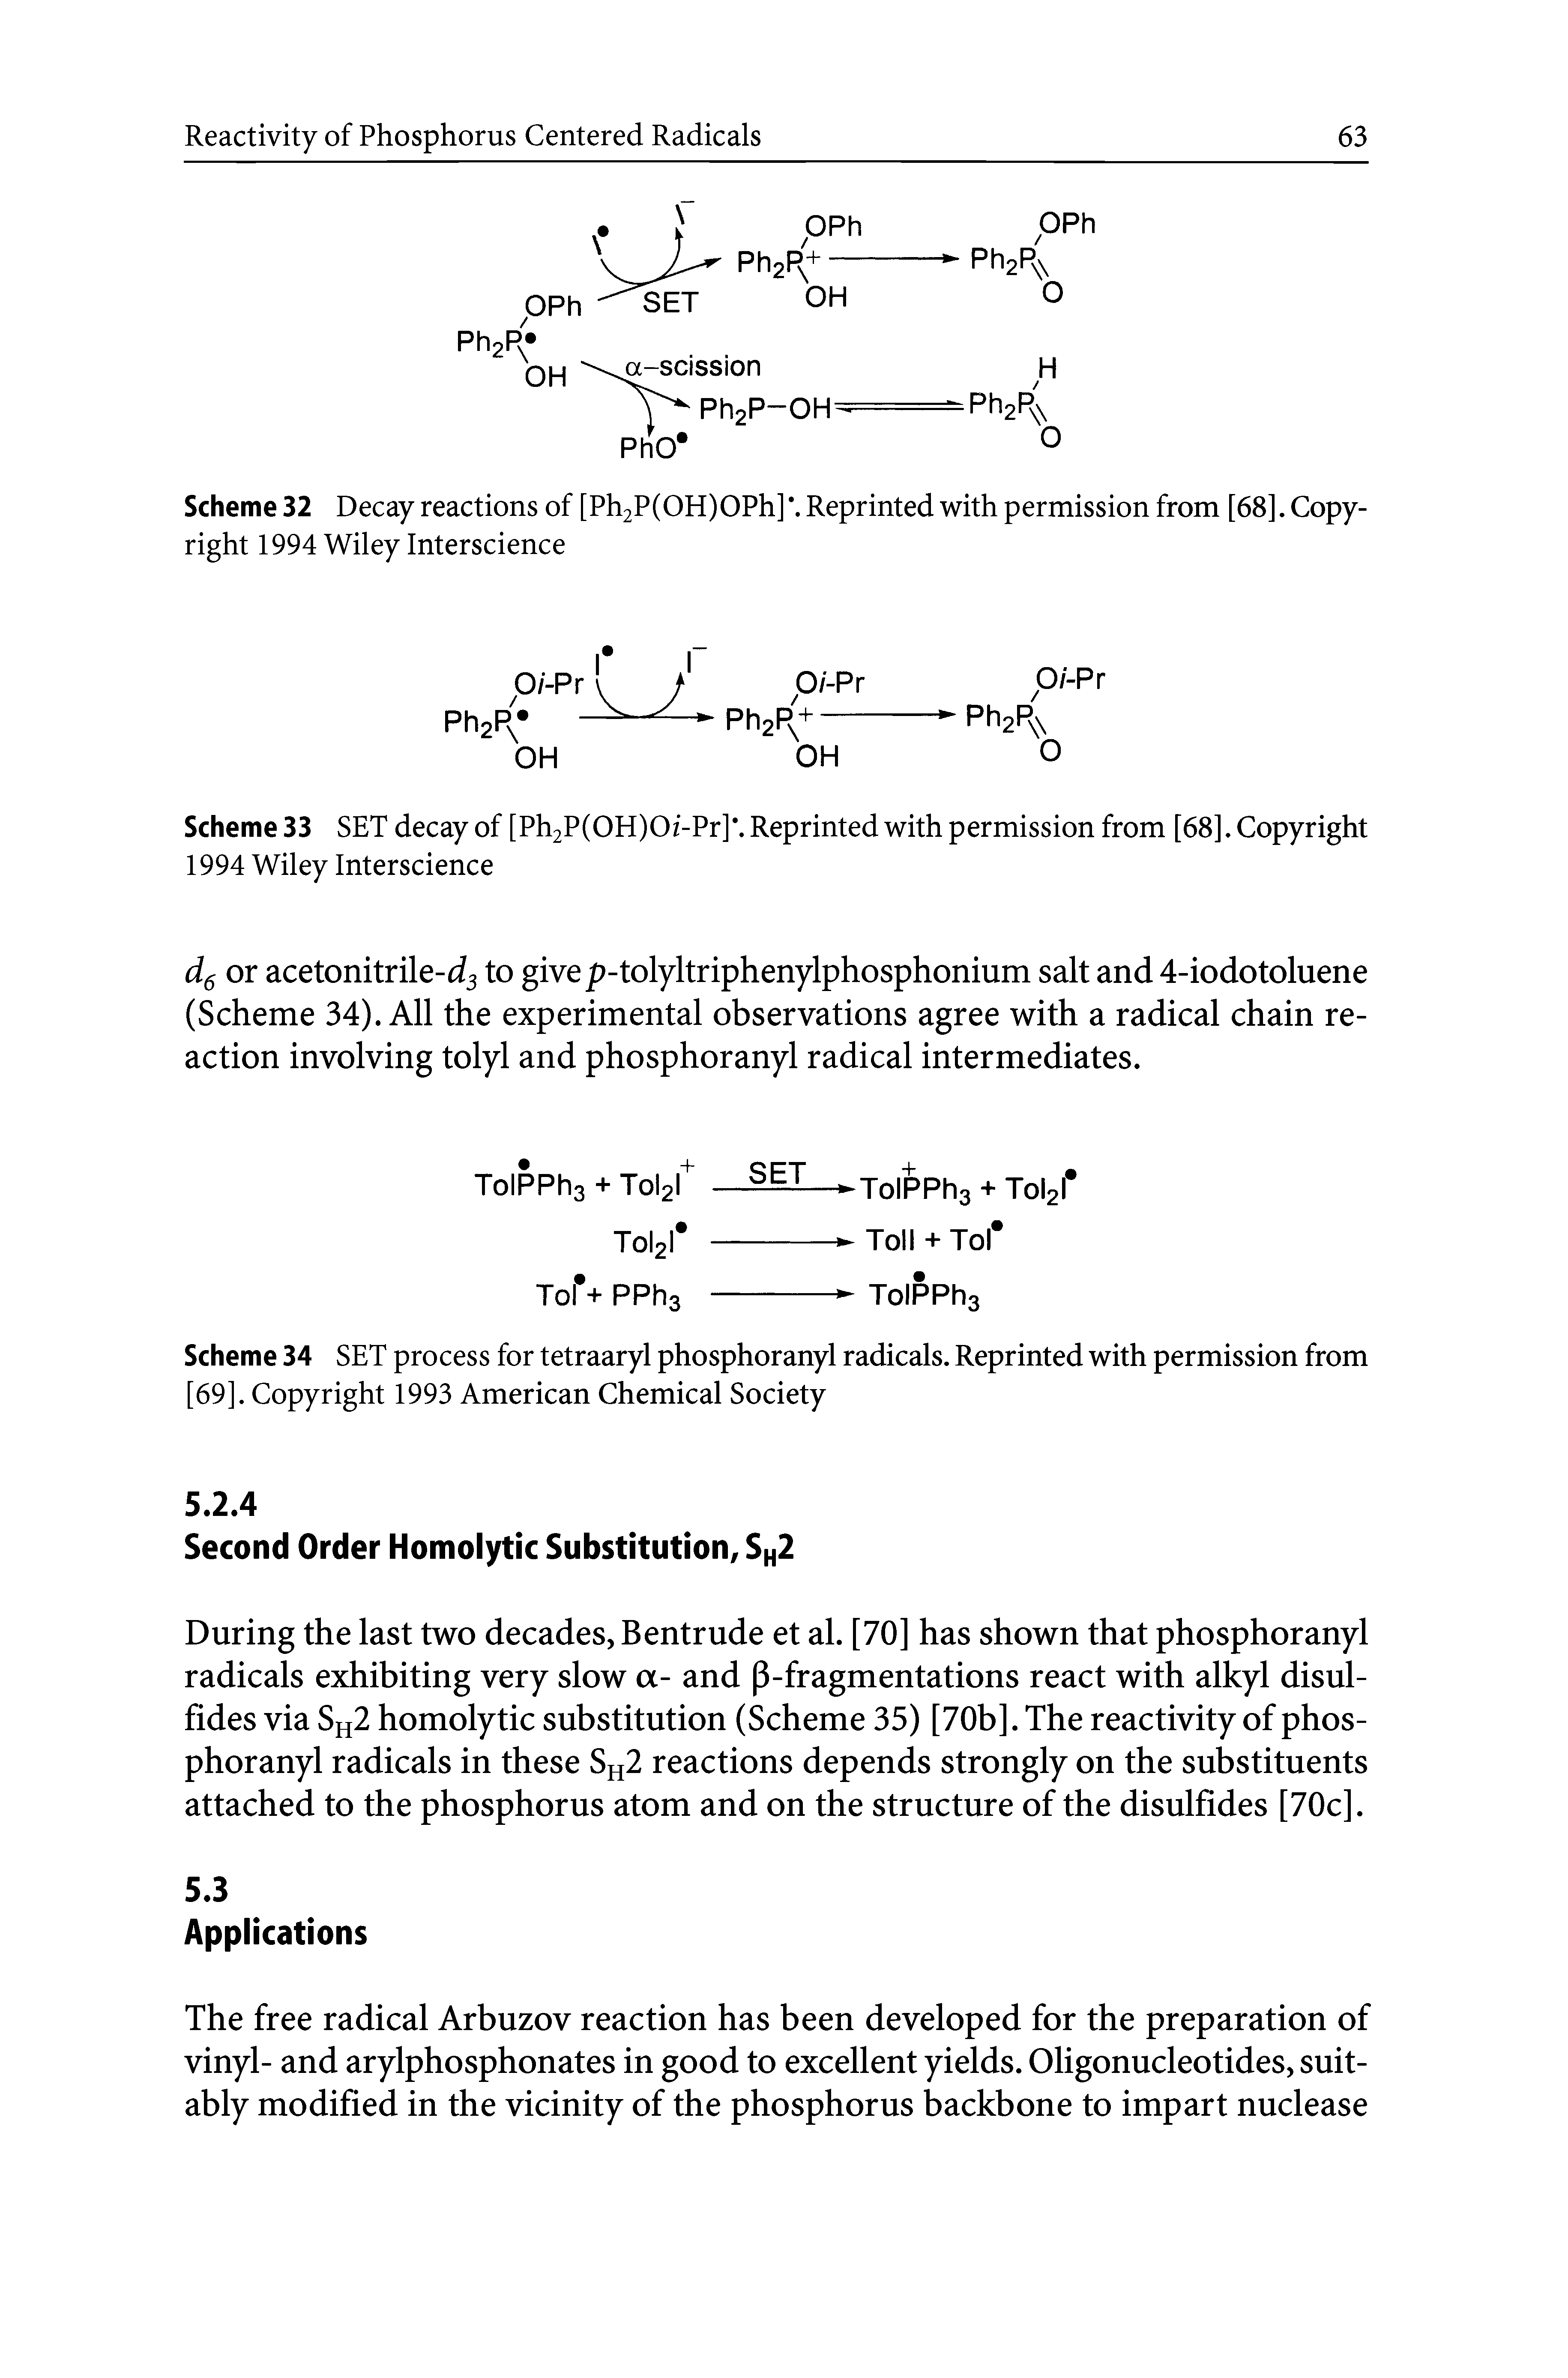 Scheme 34 SET process for tetraaryl phosphoranyl radicals. Reprinted with permission from [69]. Copyright 1993 American Chemical Society...